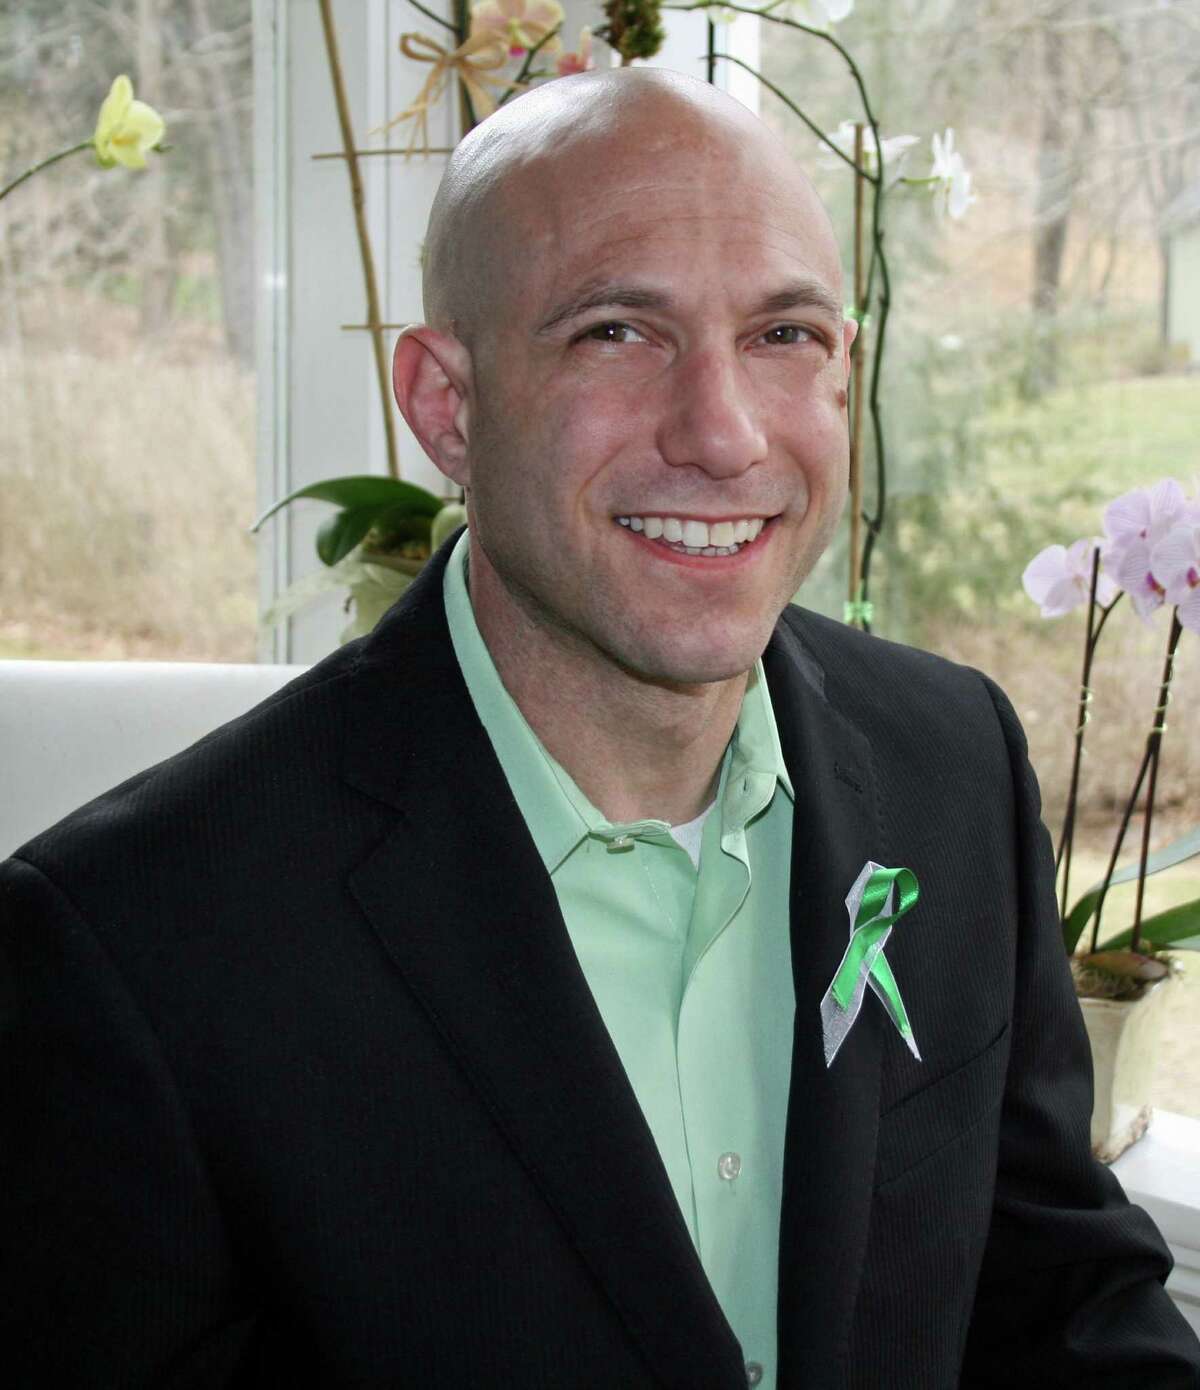 Jeremy Richman, founder and CEO, The Avielle Foundation